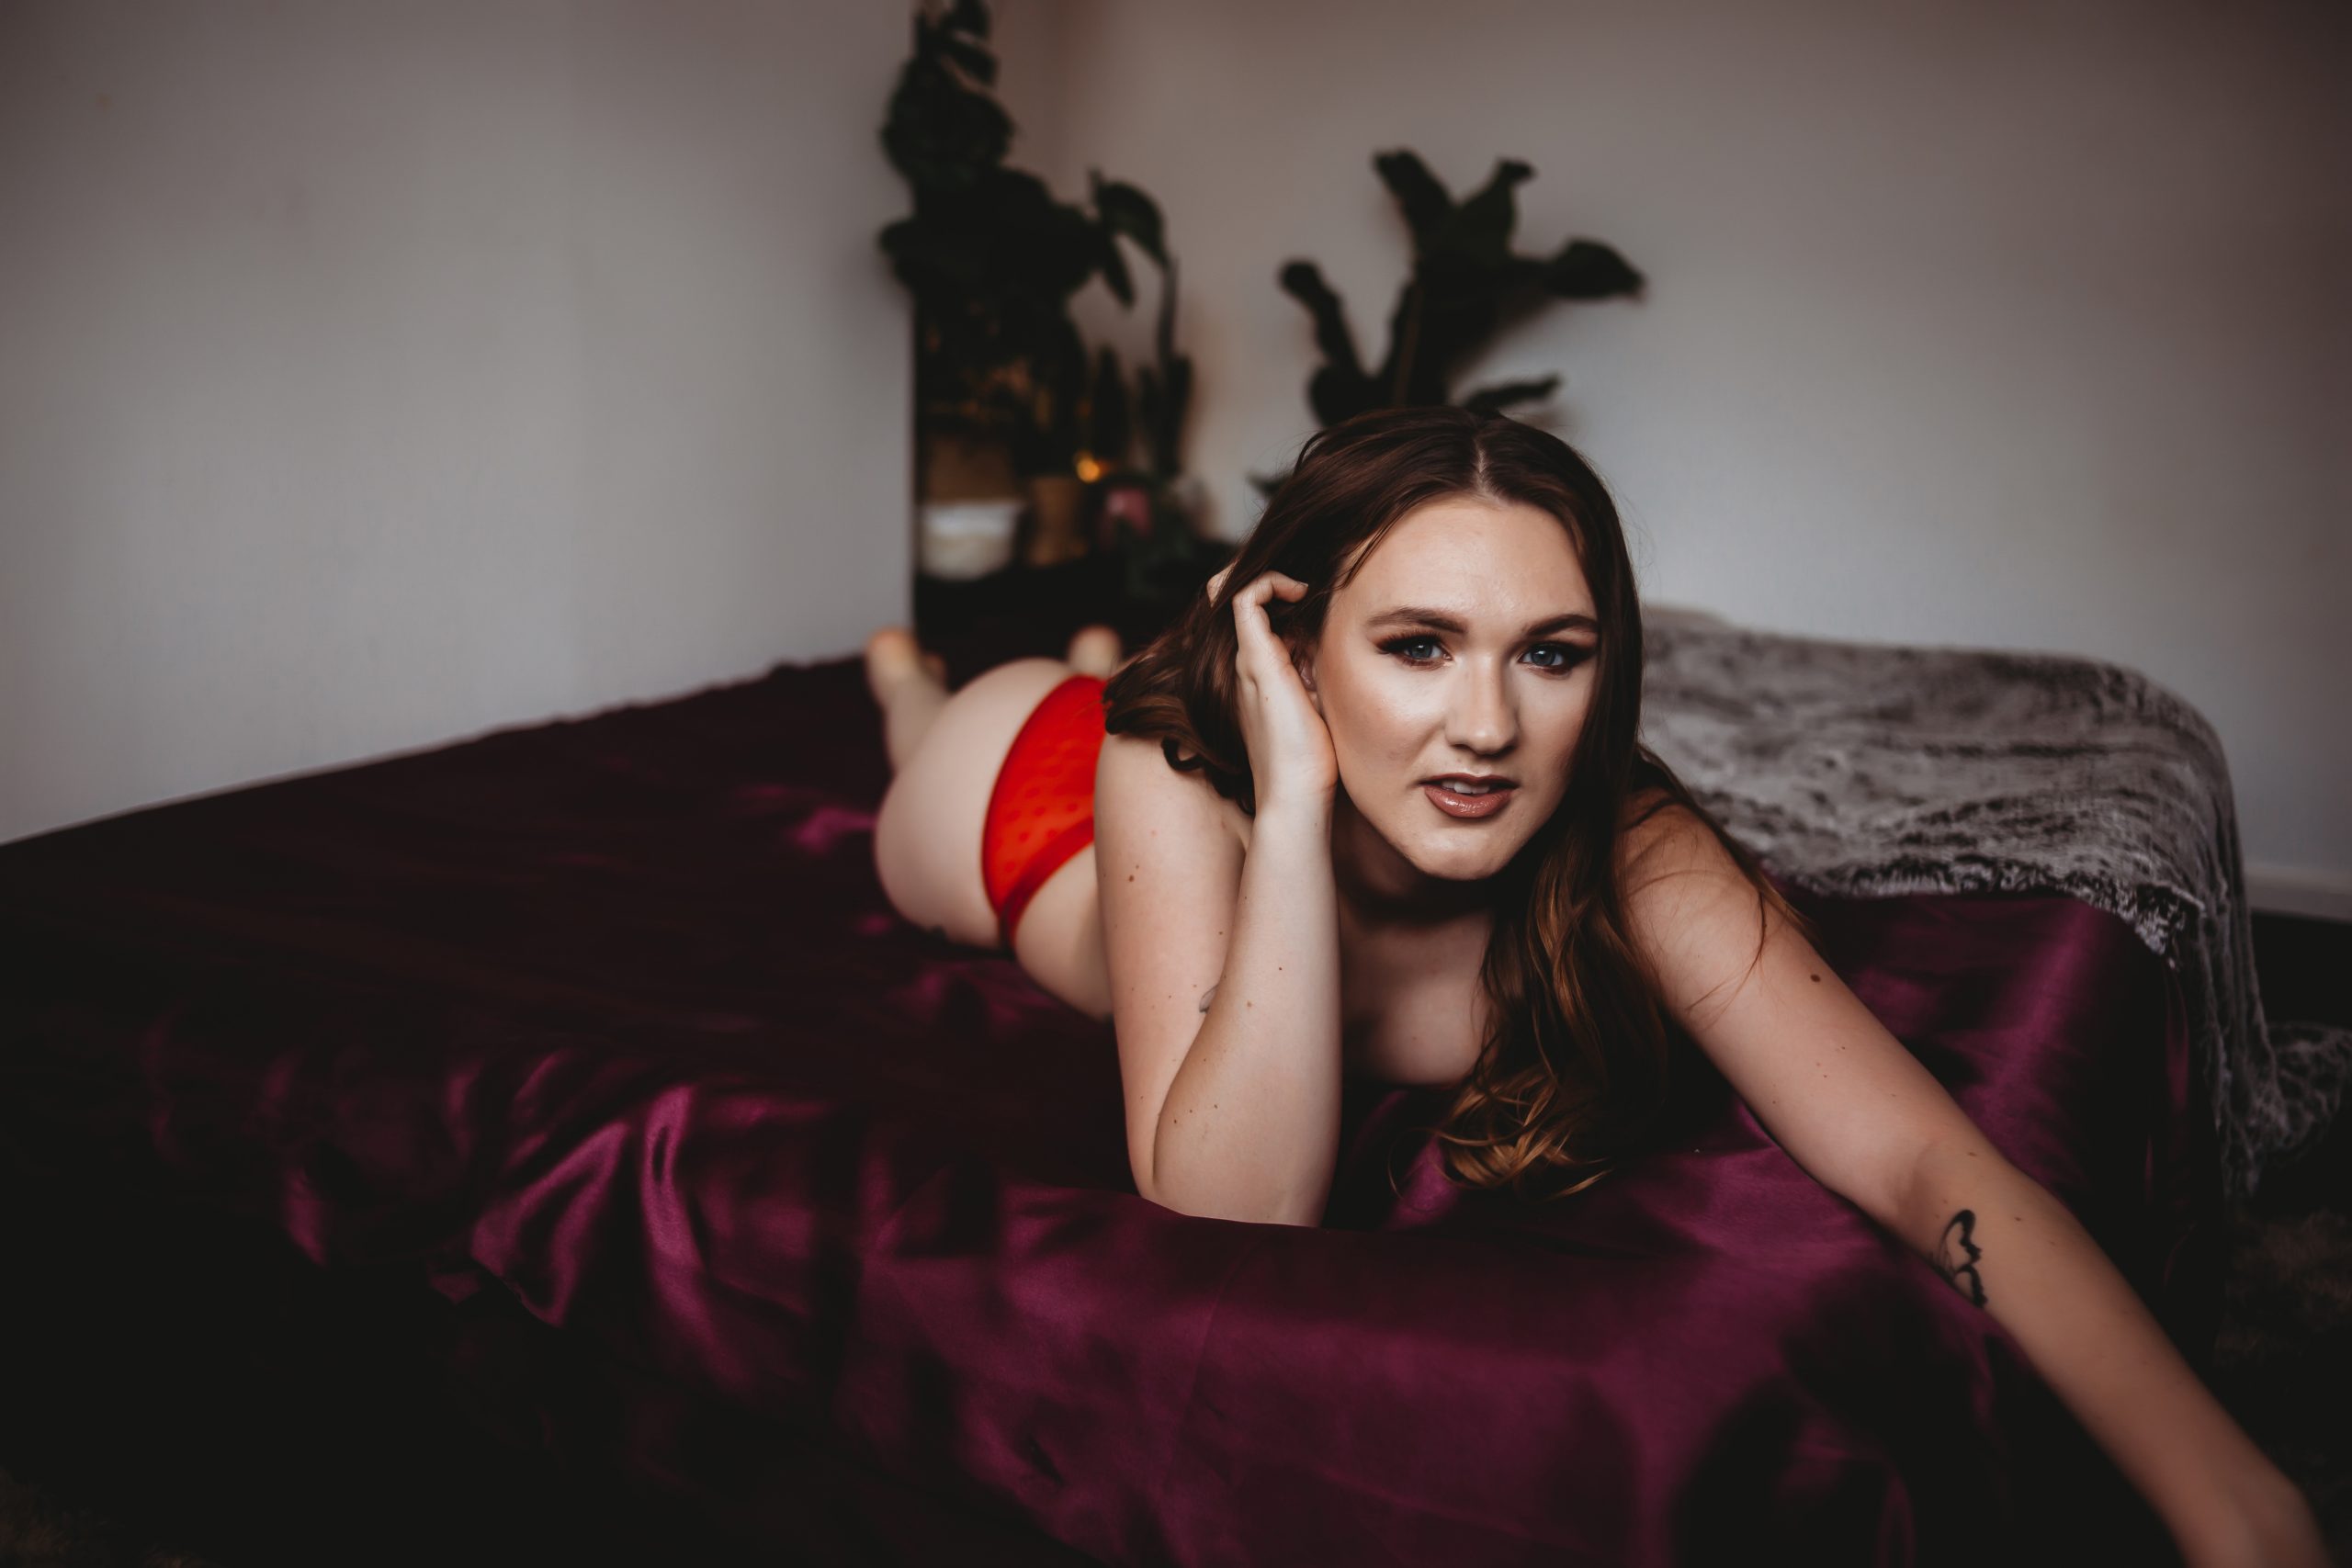 choosing outfits for your boudoir photoshoot